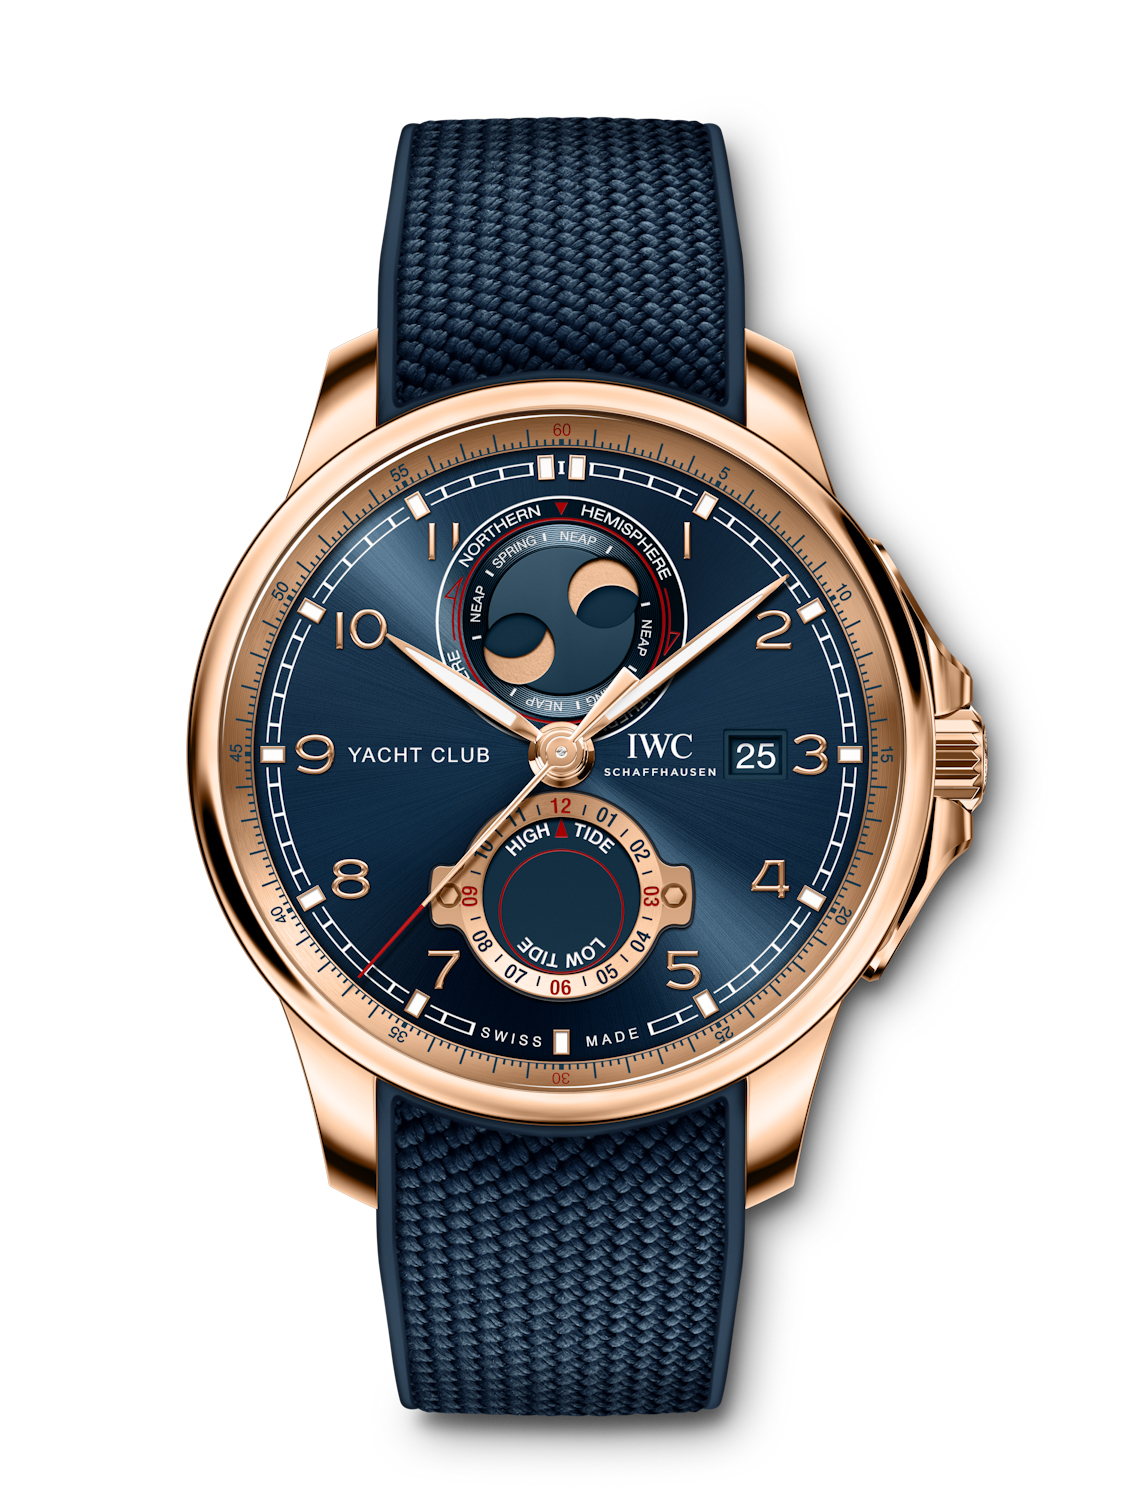 iwc Portugieser yacht club moon & tide timeandwatches.pl